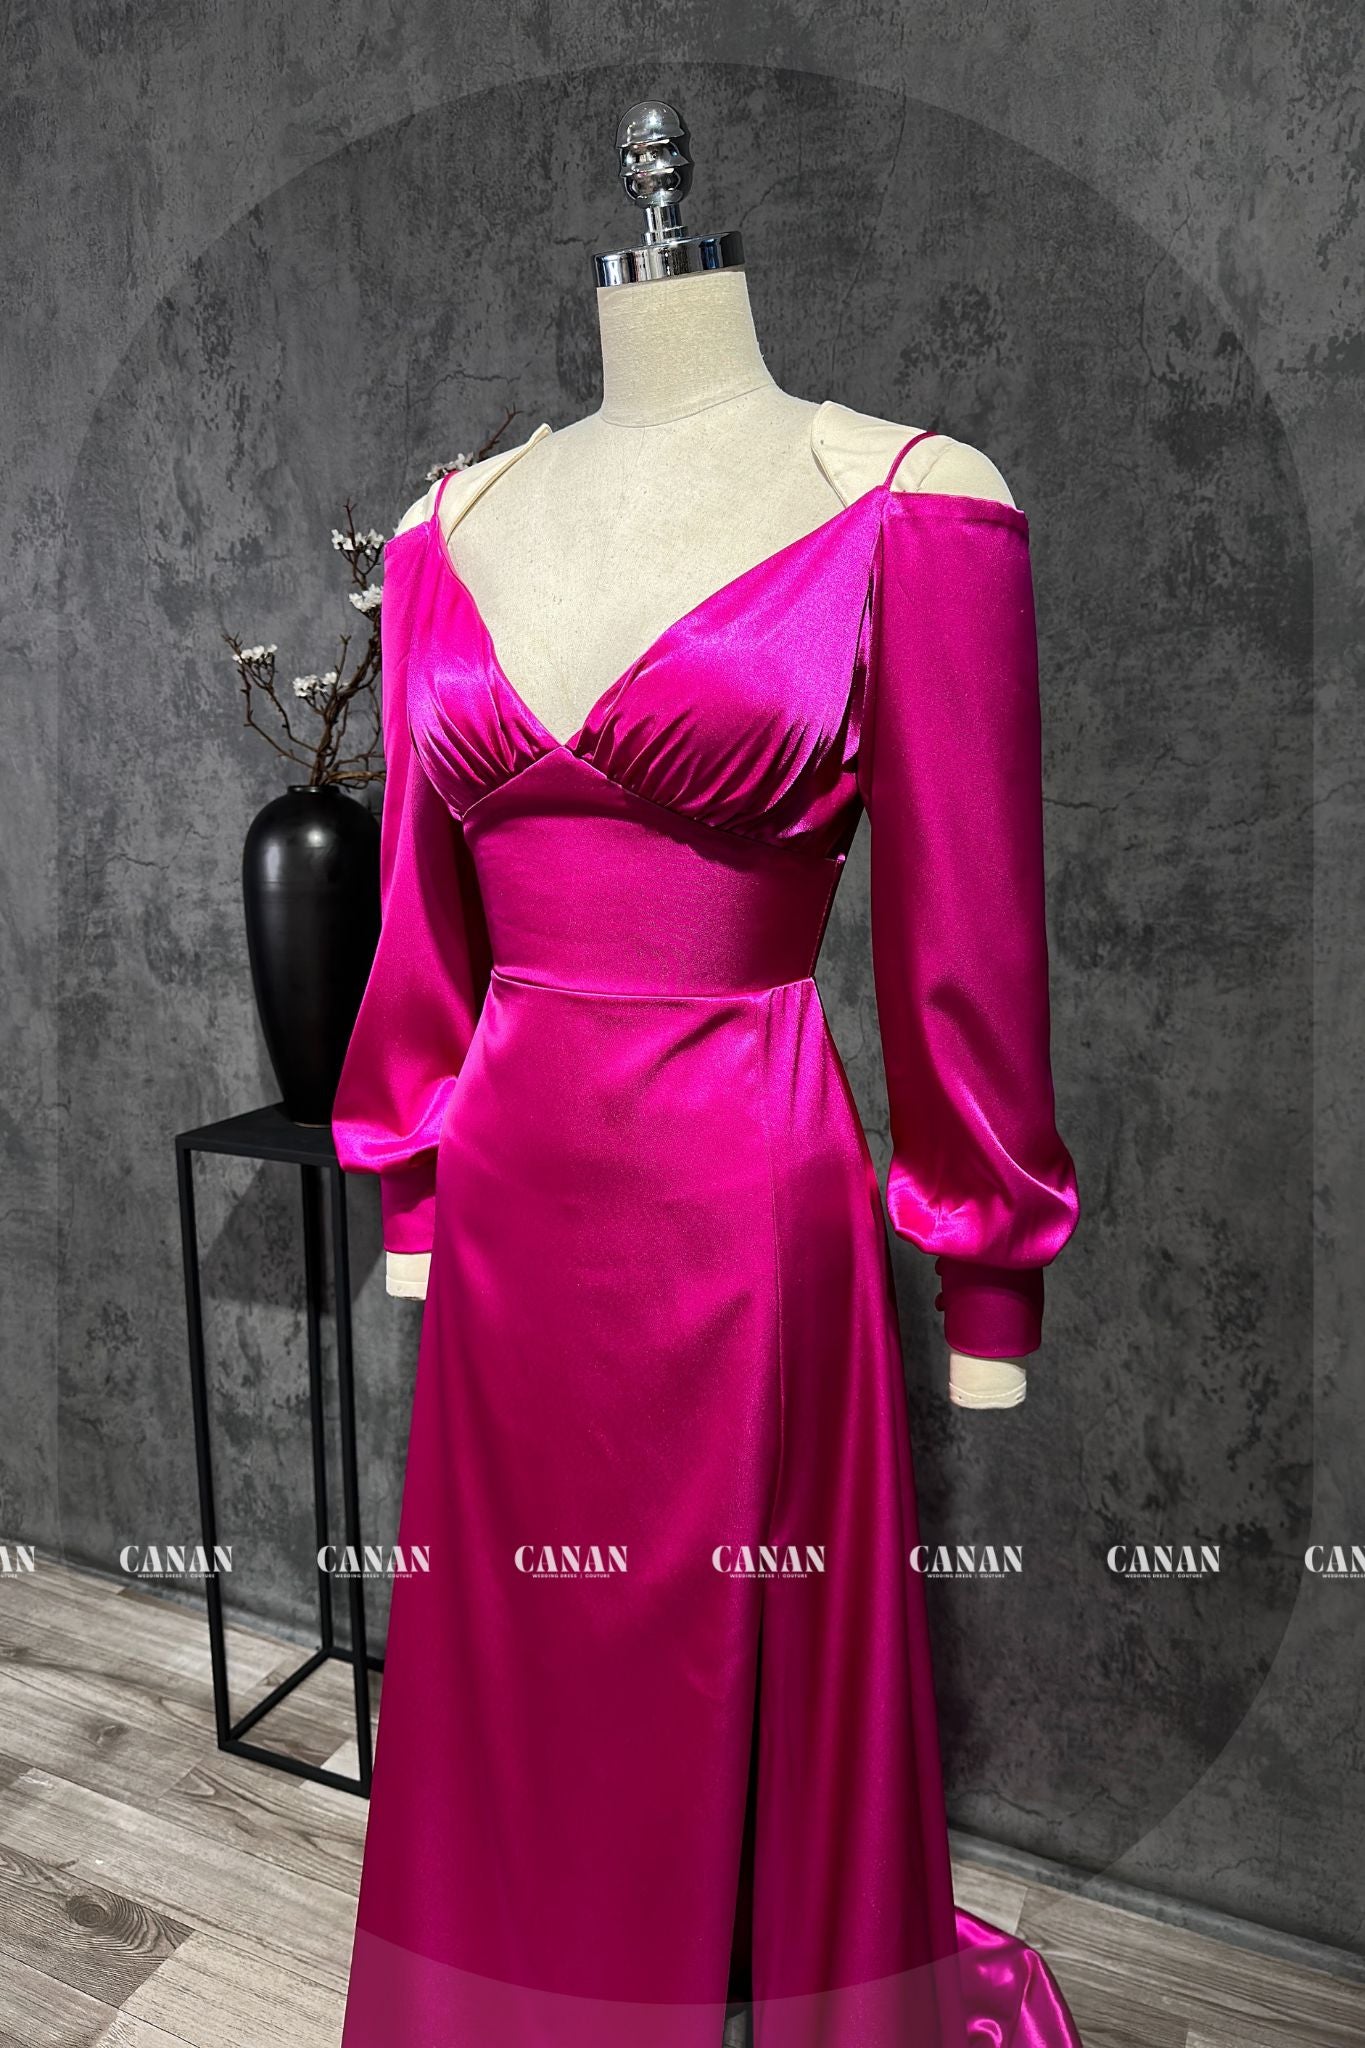 Dilys - Luxurious Lotus Pink Evening Dress with Sensual Silhouette